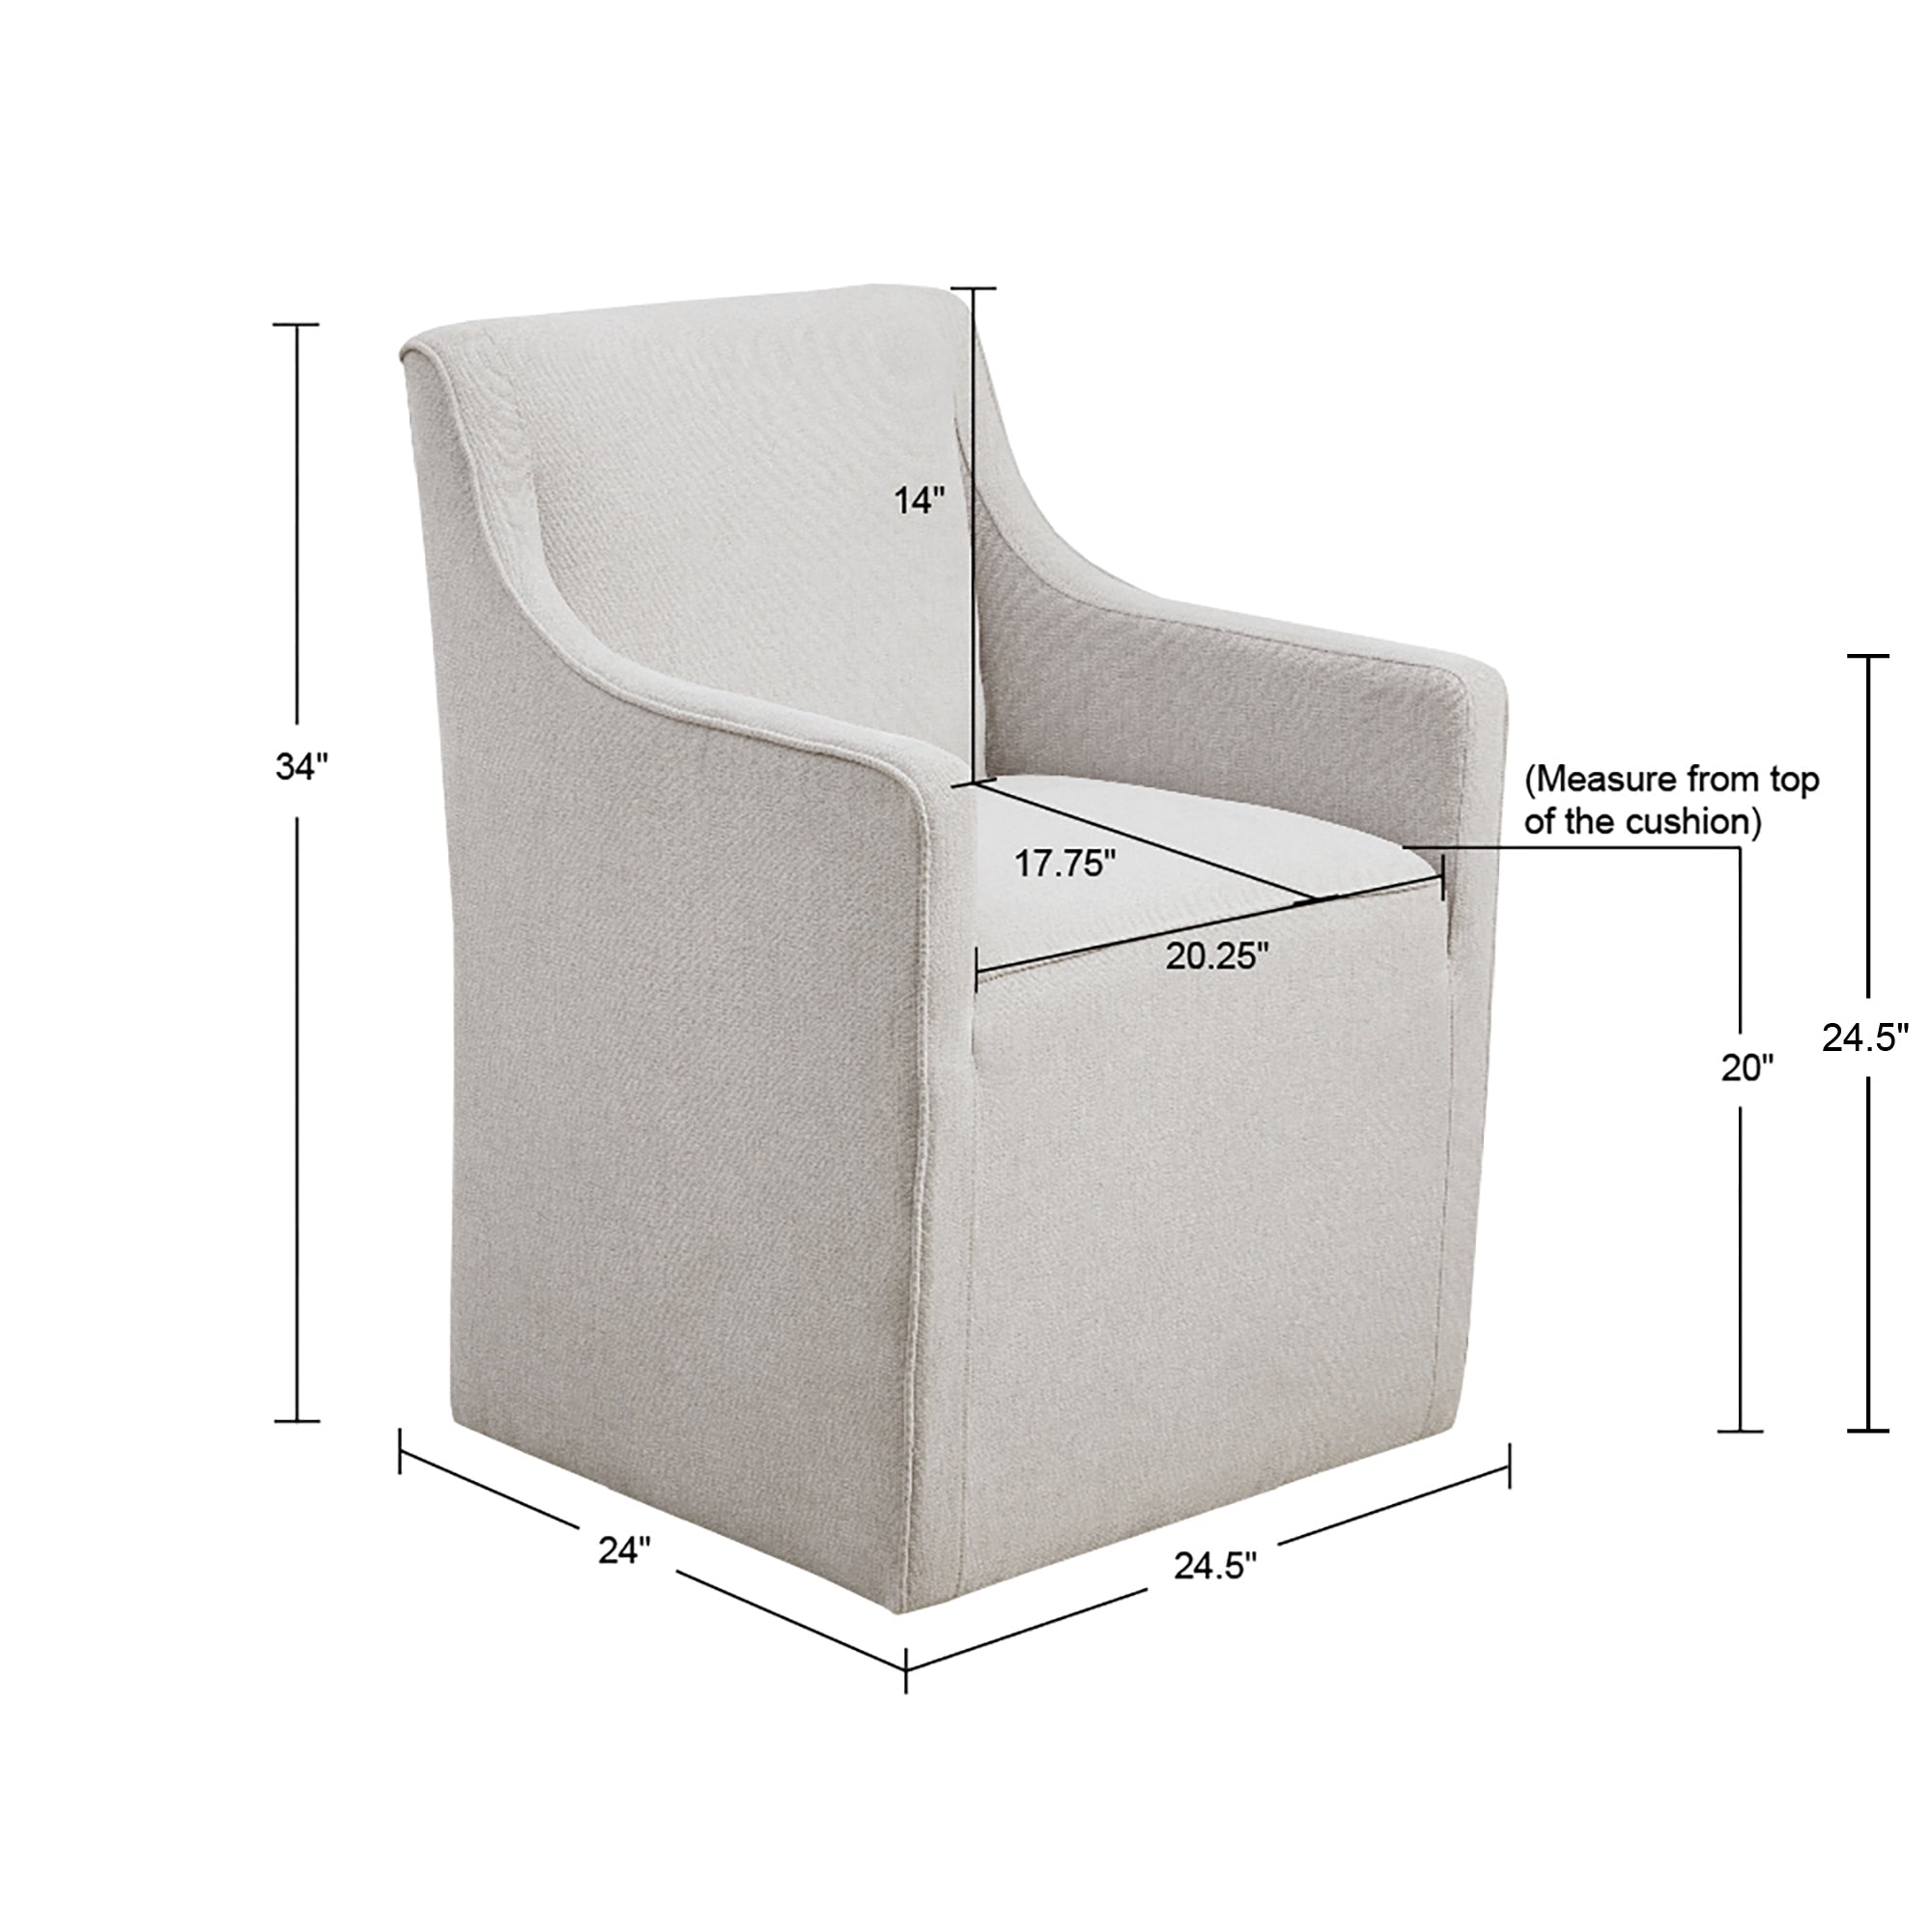 Slipcover Dining Arm Chair with Casters - Grey